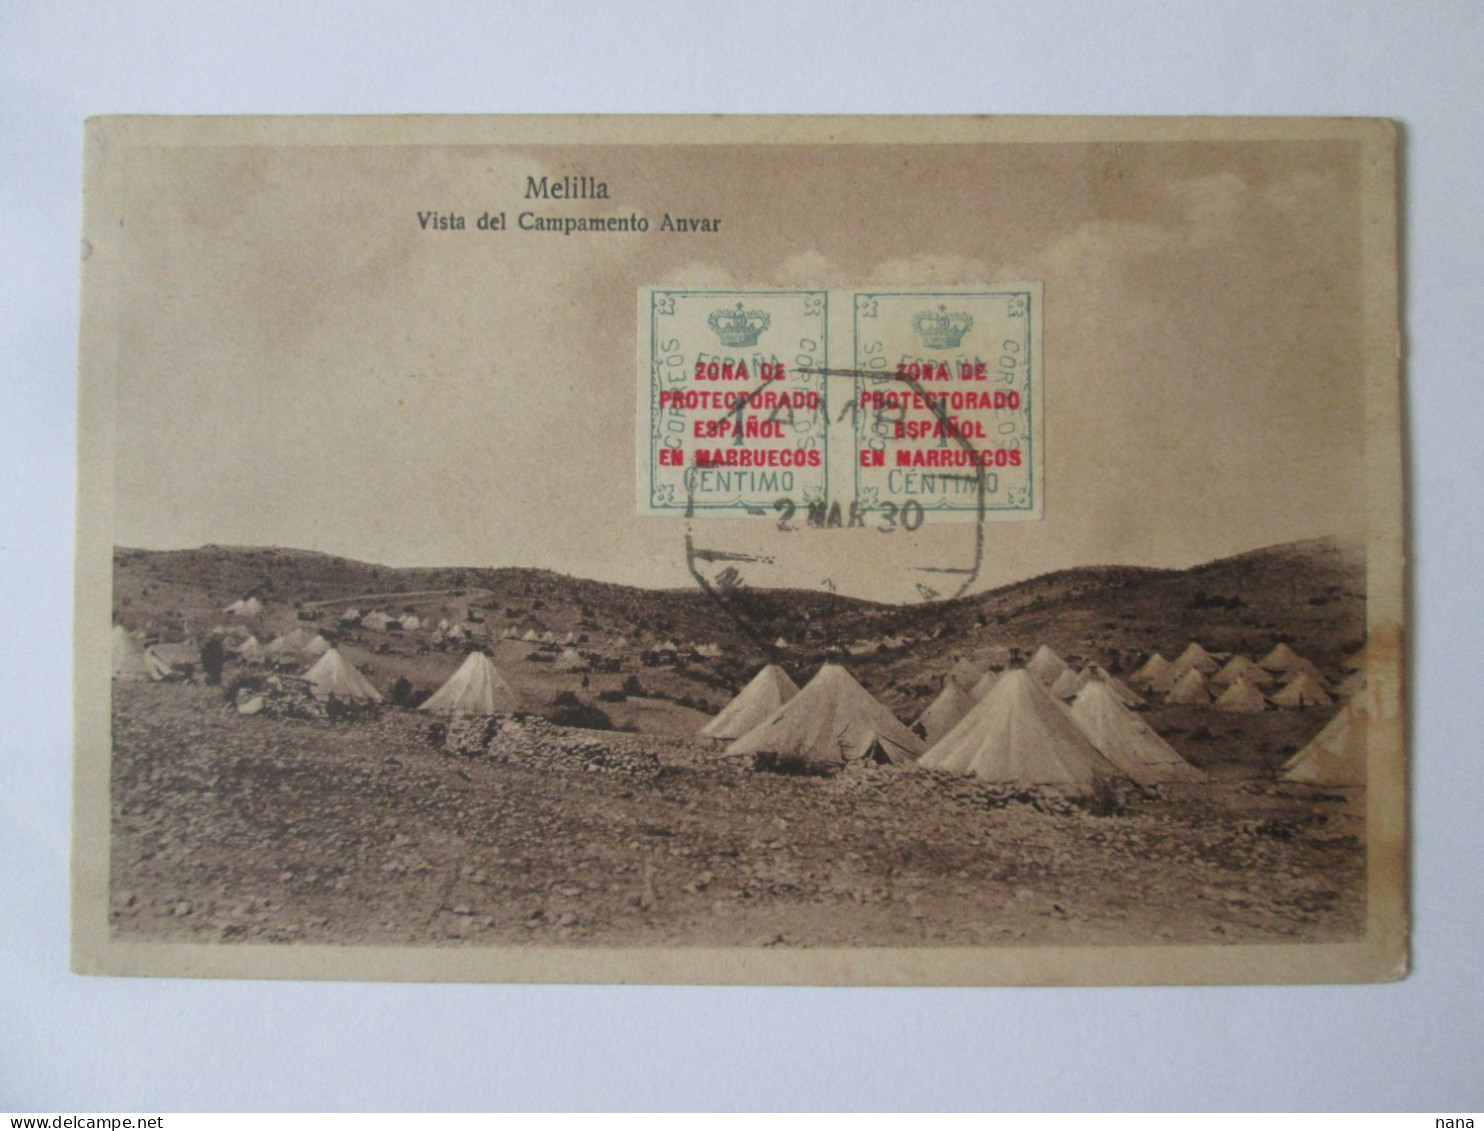 Rare! Spain/Melilla:View Of Anvar Camp With Rare Stamps From 1930:Spanish Protectorate Zone In Morocco,unused Poscard - Melilla